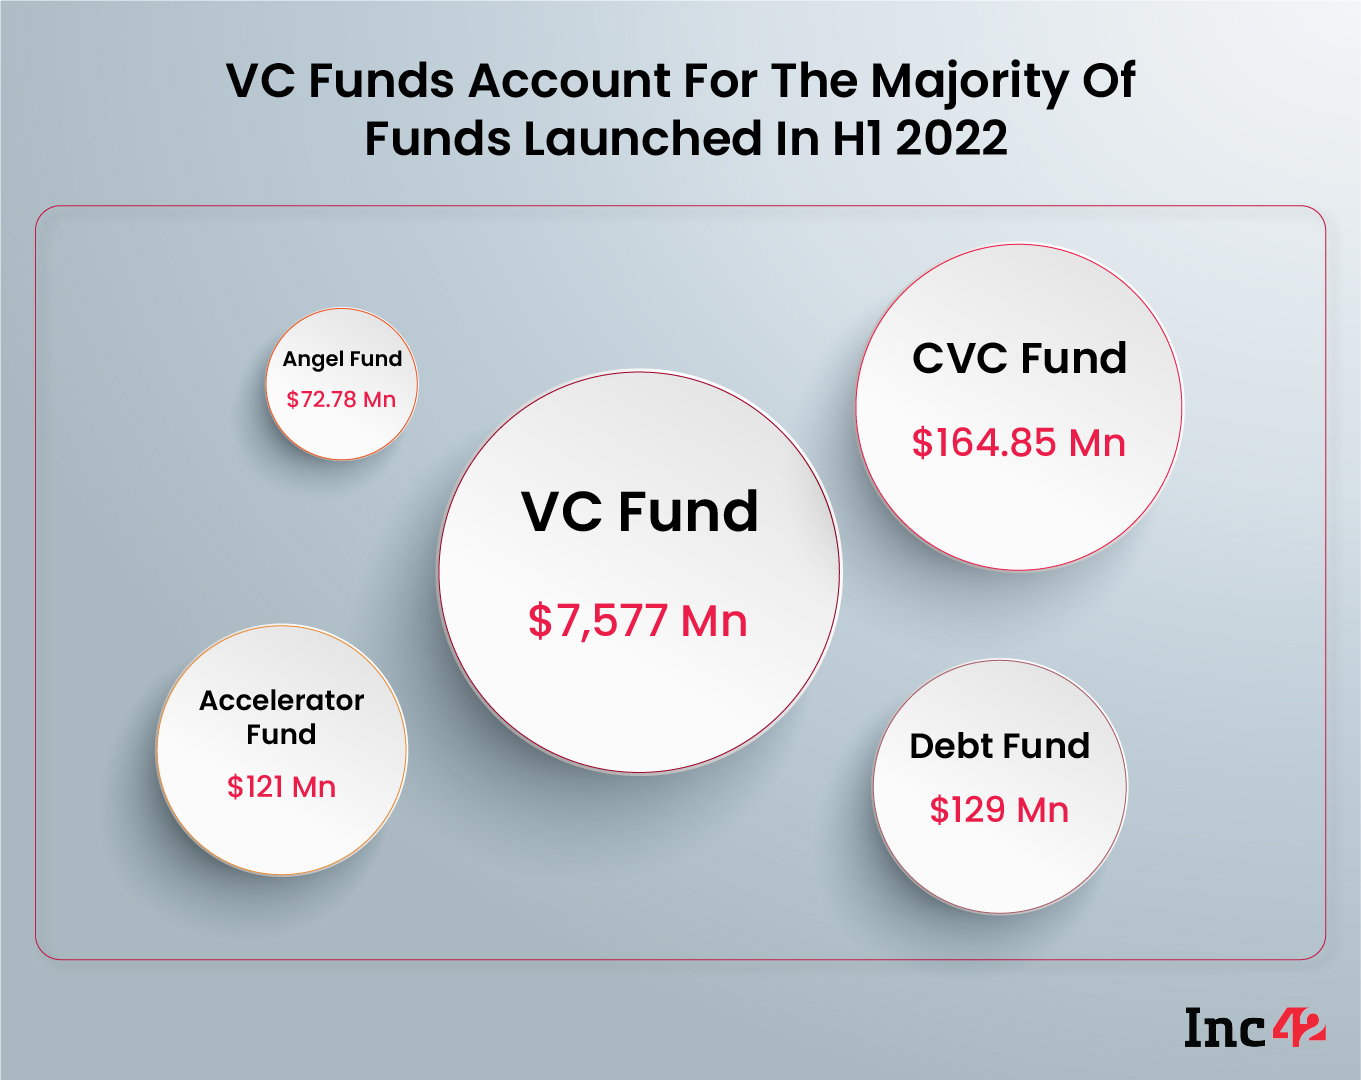 VC funds account for almost 70% of all funds launched in 2022 so far